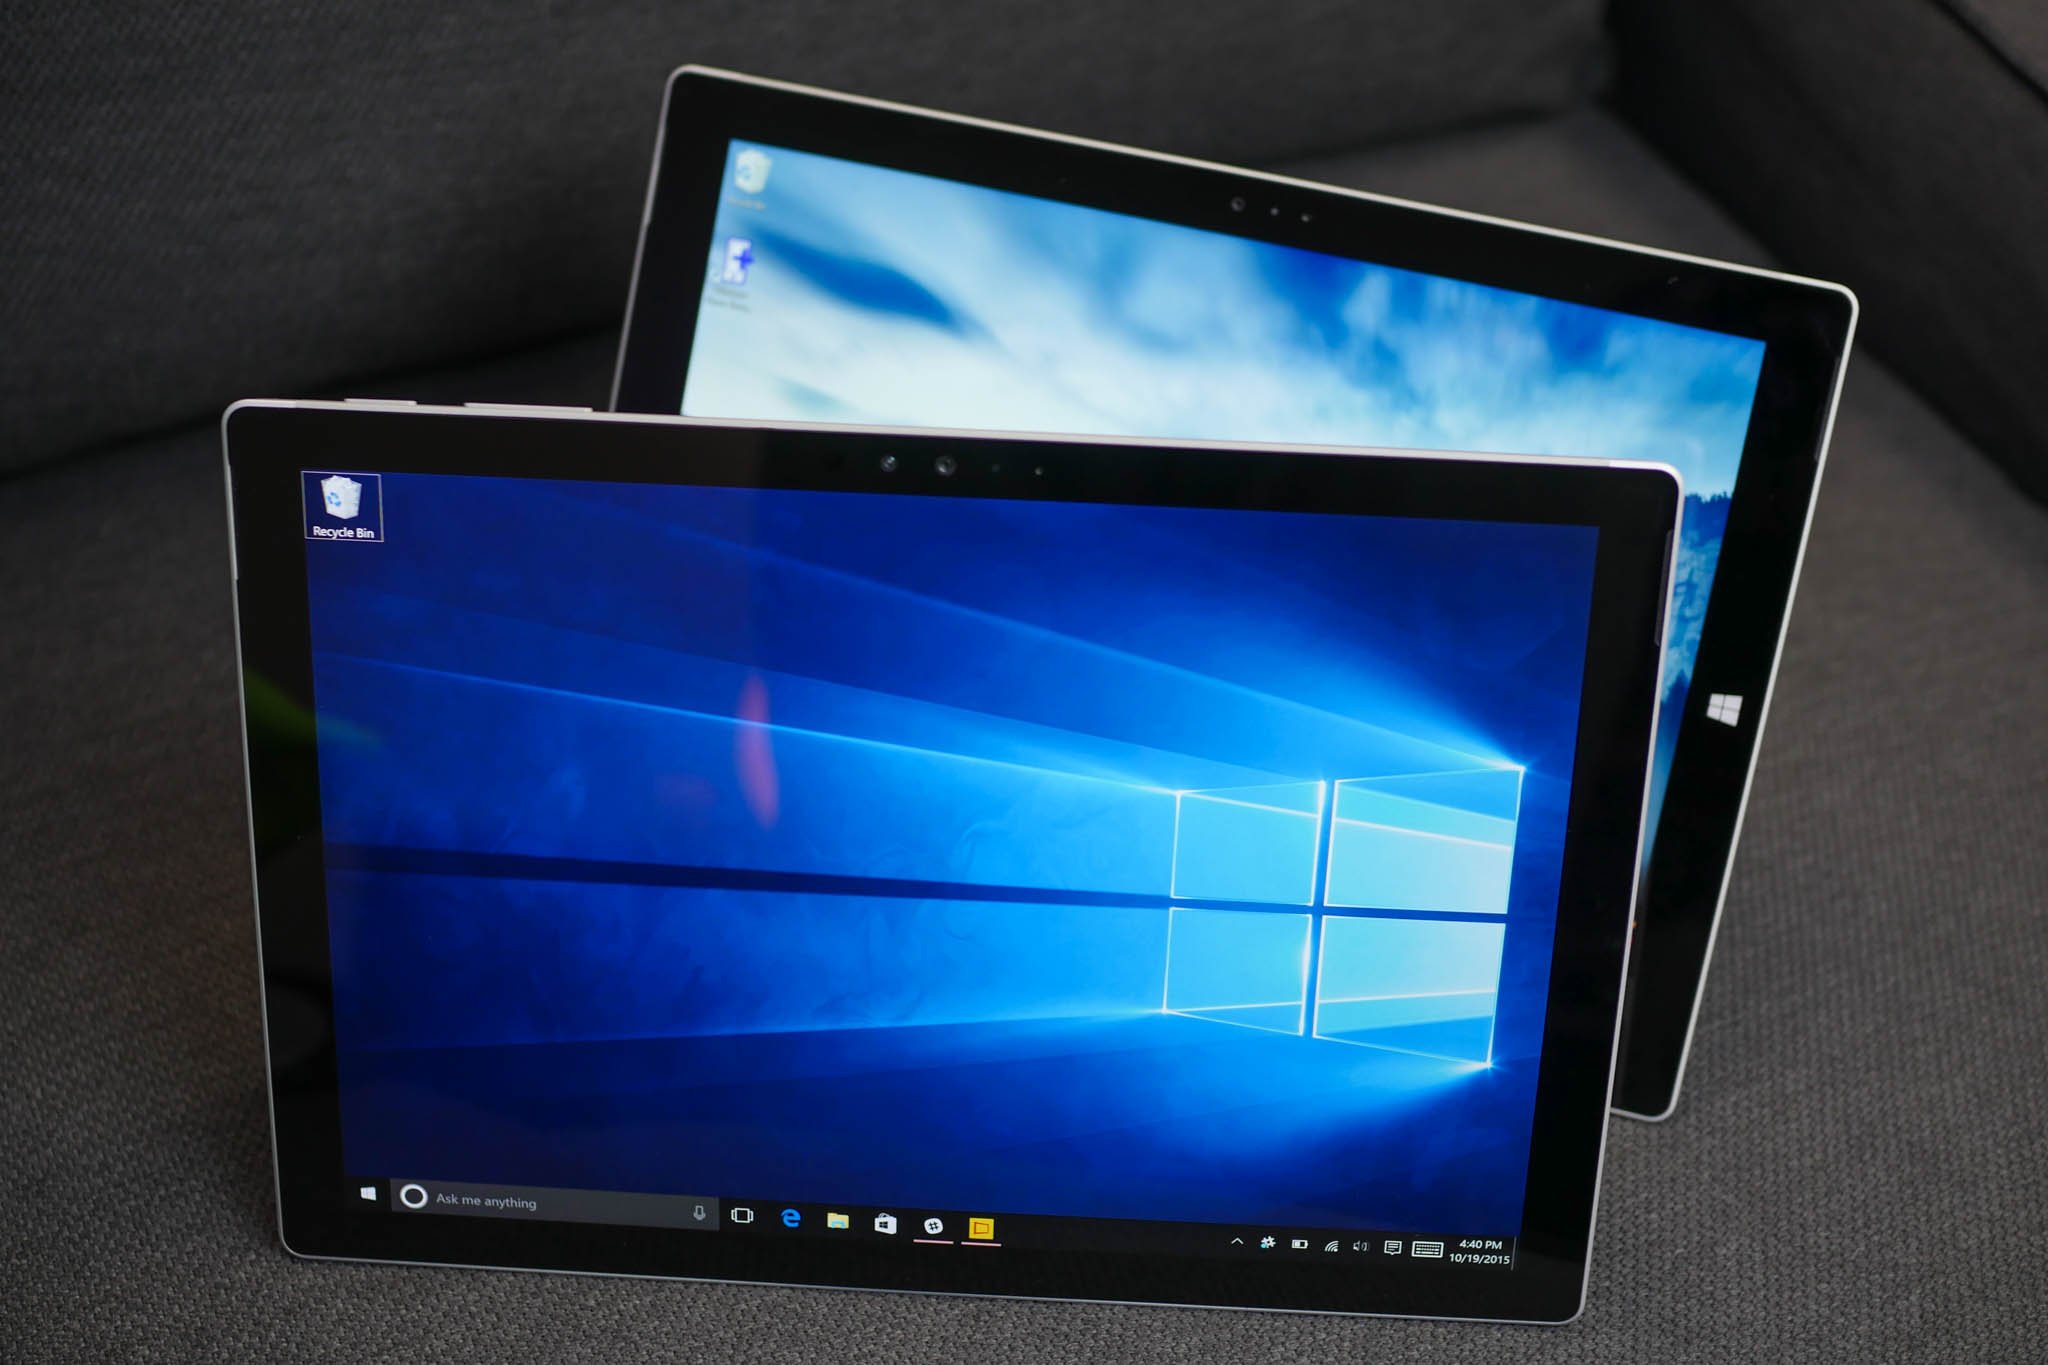 Microsoft posts changes for recent batch of Surface firmware updates